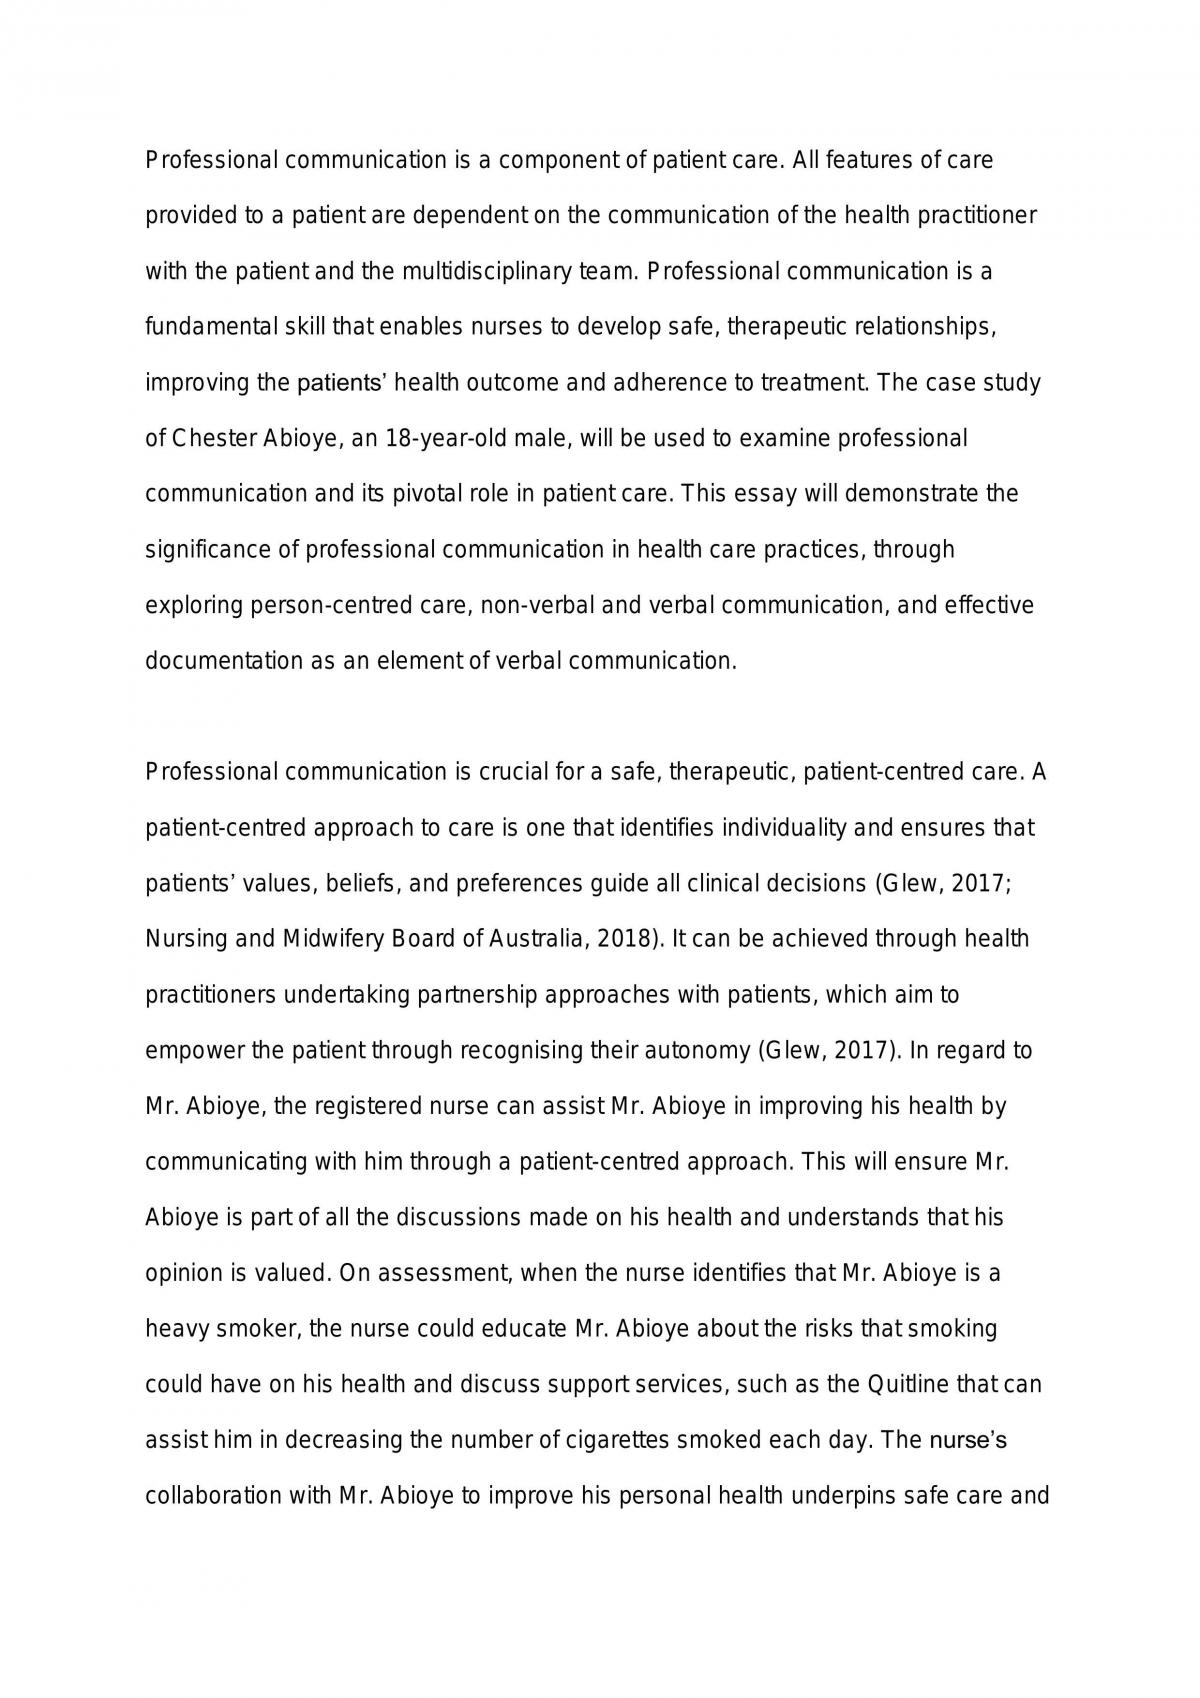 Professional Communication in Nursing Essay  - Page 1